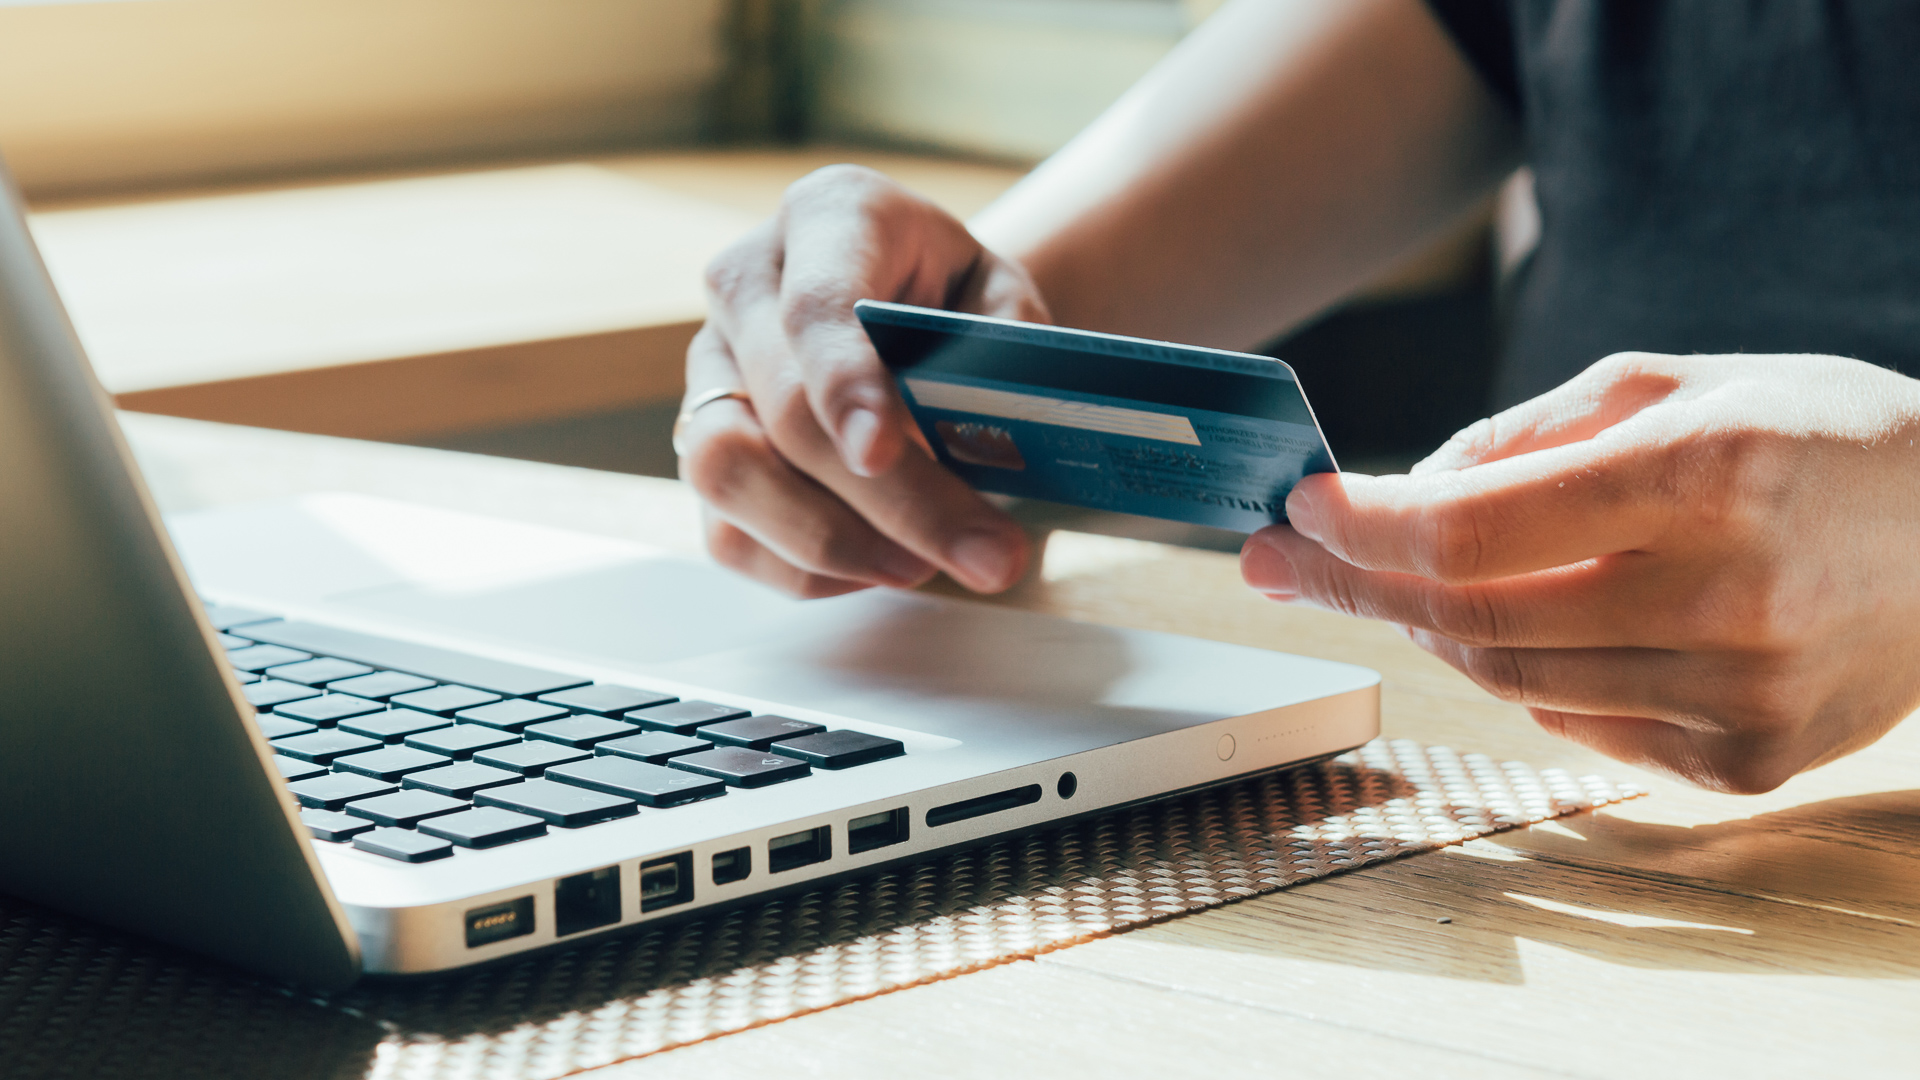 best credit card processing for small business